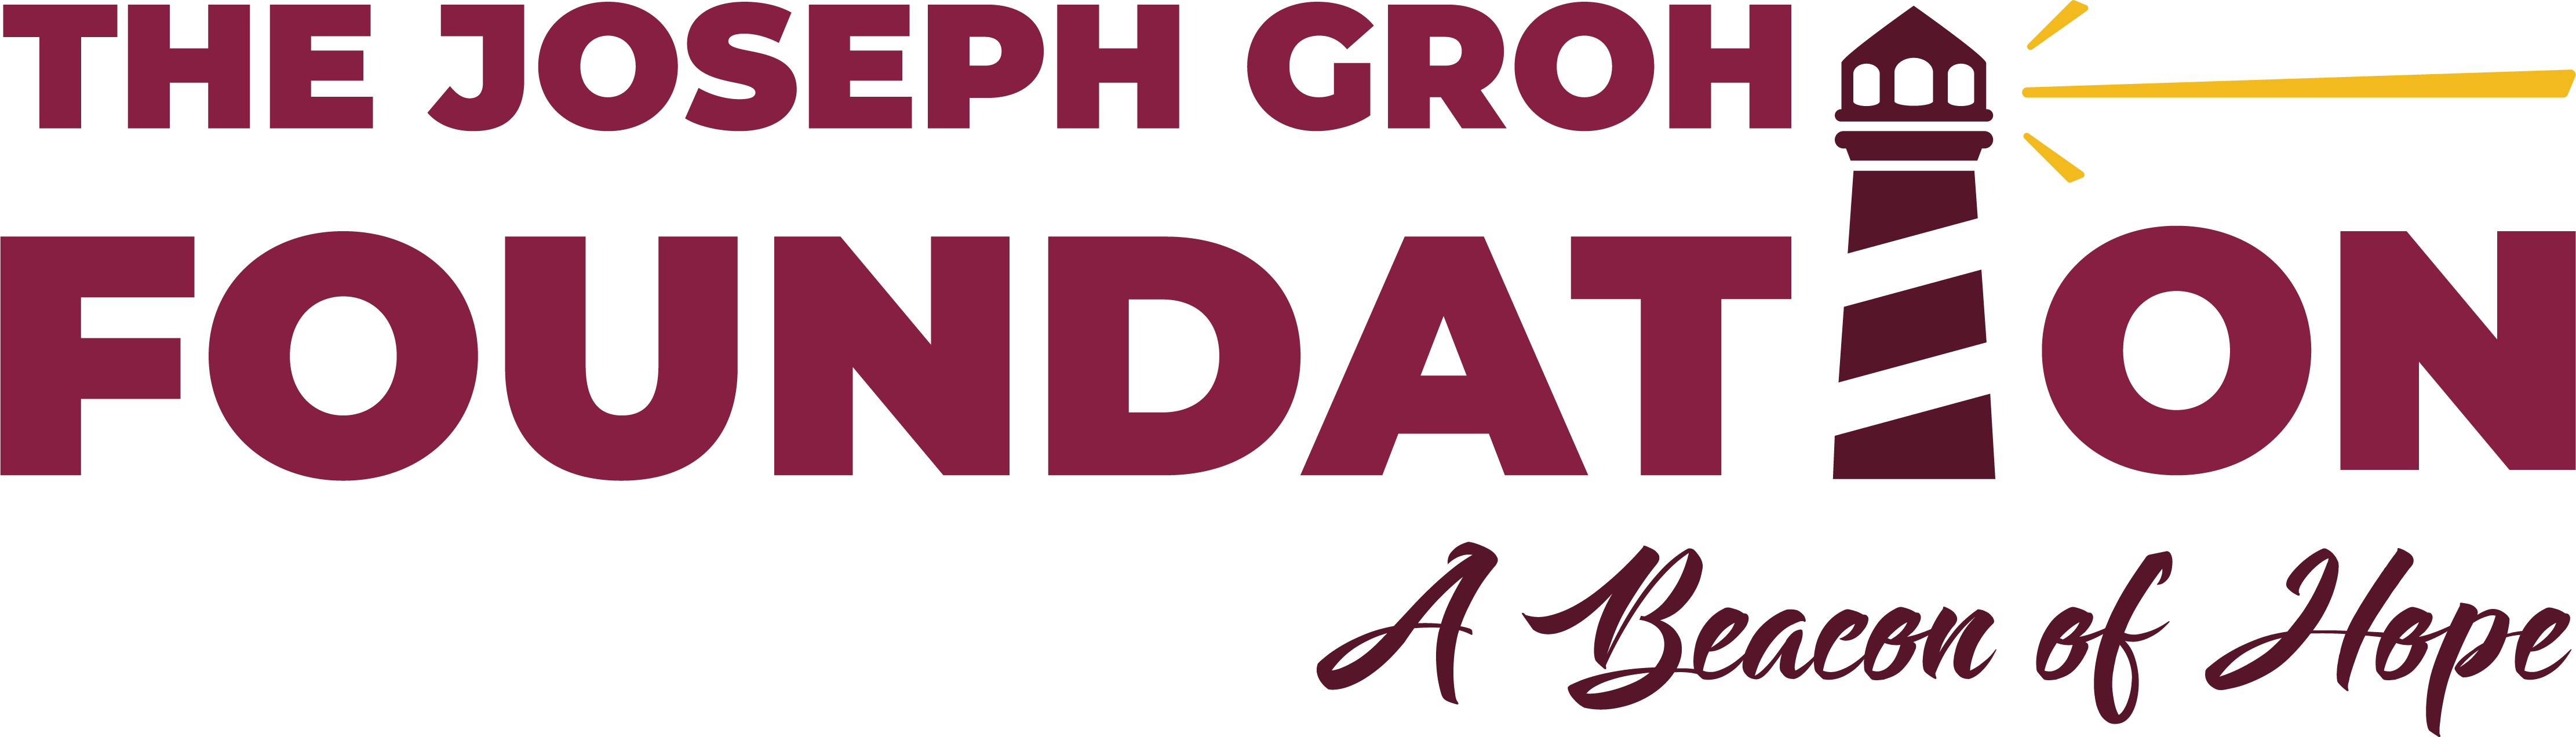 The Joseph S. Groh Foundation is dedicated to providing financial support to those with a family connection to the construction trades industry and who are living with life-altering disabilities.